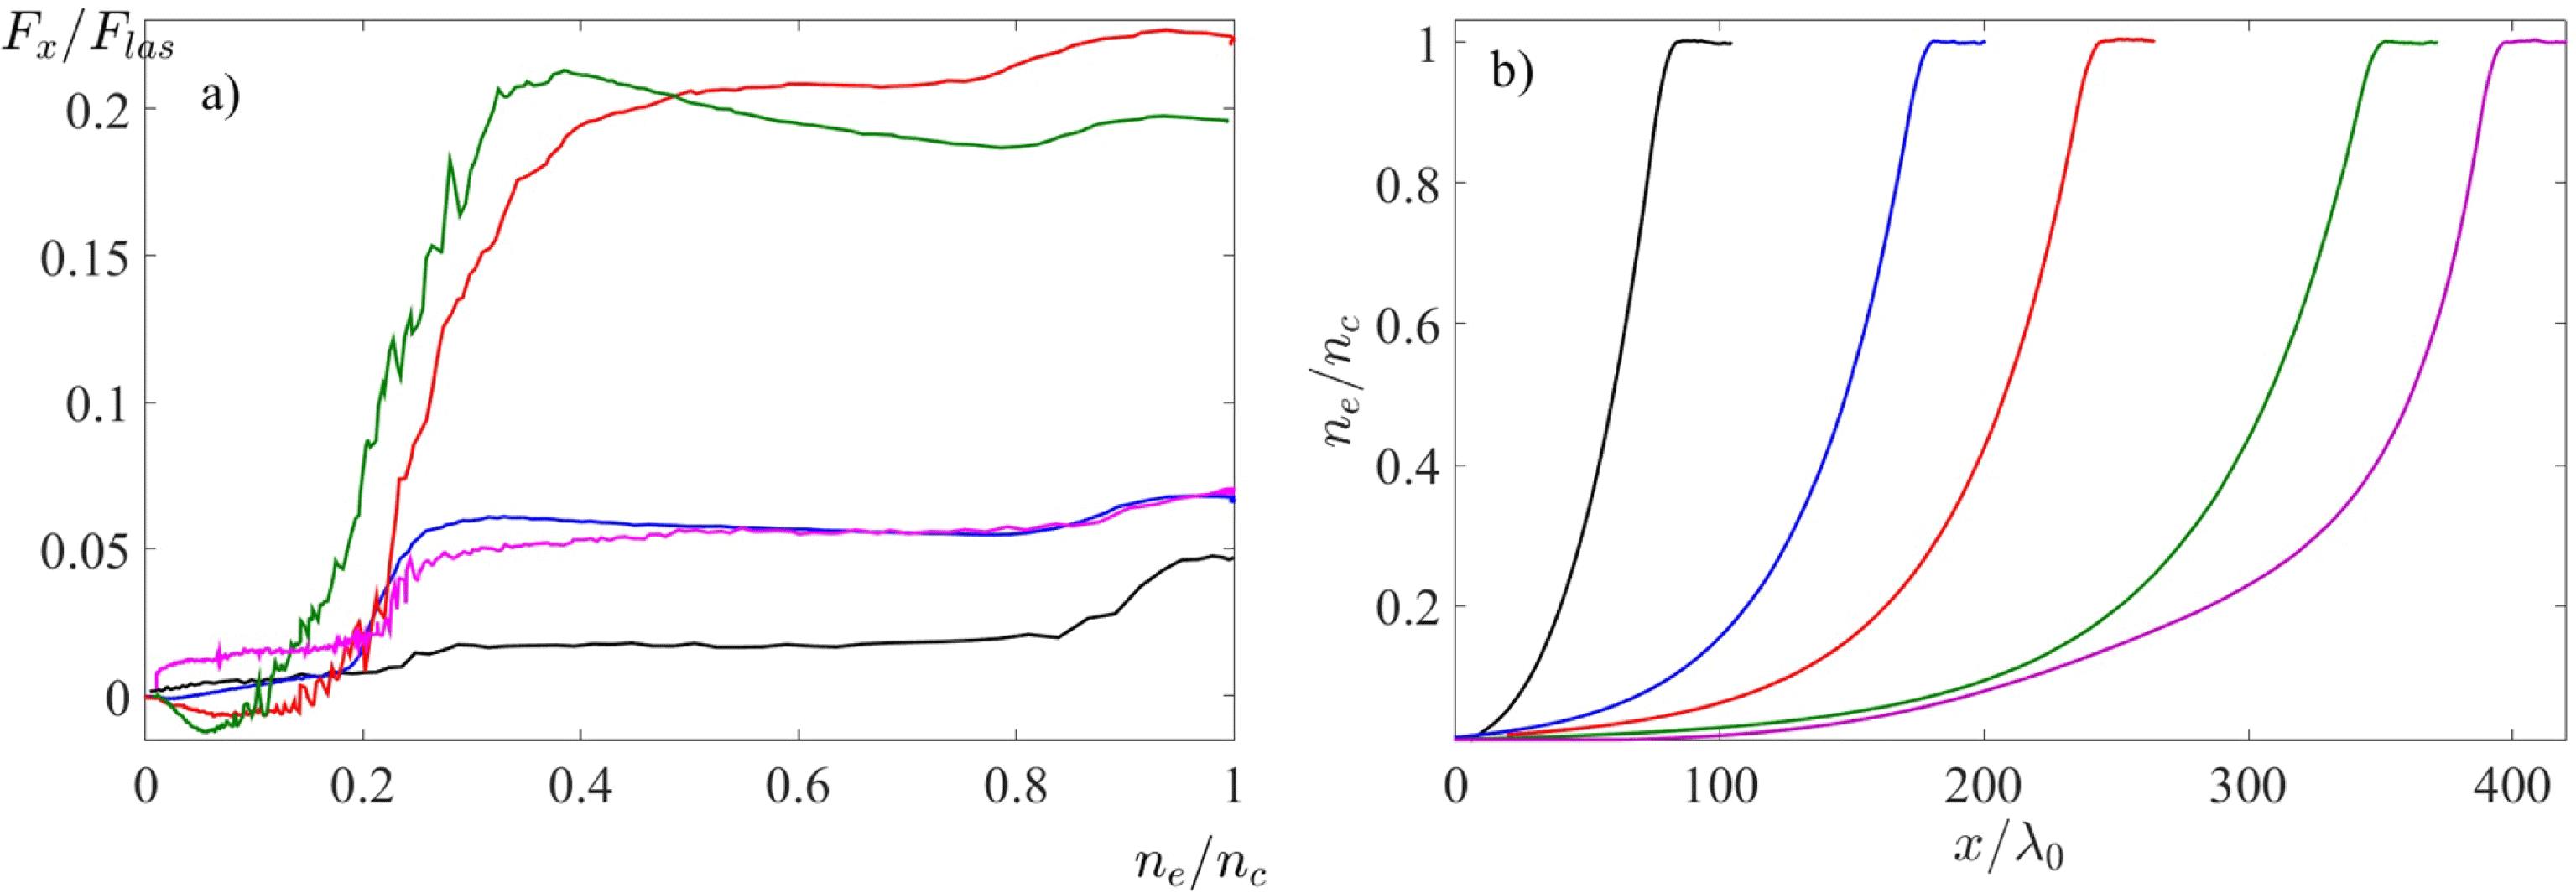 (a) Dependence of the longitudinal component of the electron energy flux $F_{x}$ (Equation (1)) on the plasma density averaged over the transverse coordinate and the last 1 ps of the simulation time. The electron energy flux is normalized to the instantaneous incident laser energy flux $F_{\text{las}}(t_{p})$. (b) Electron density profiles in the expanding plasmas used in PIC simulations. The five lines in both panels correspond to the pulse time $t_{p}$ given in Table 1: black $t_{p}=-200$ ps, blue $t_{p}=-100$ ps, red $t_{p}=0$, green $t_{p}=100$ ps and pink $t_{p}=200$ ps.